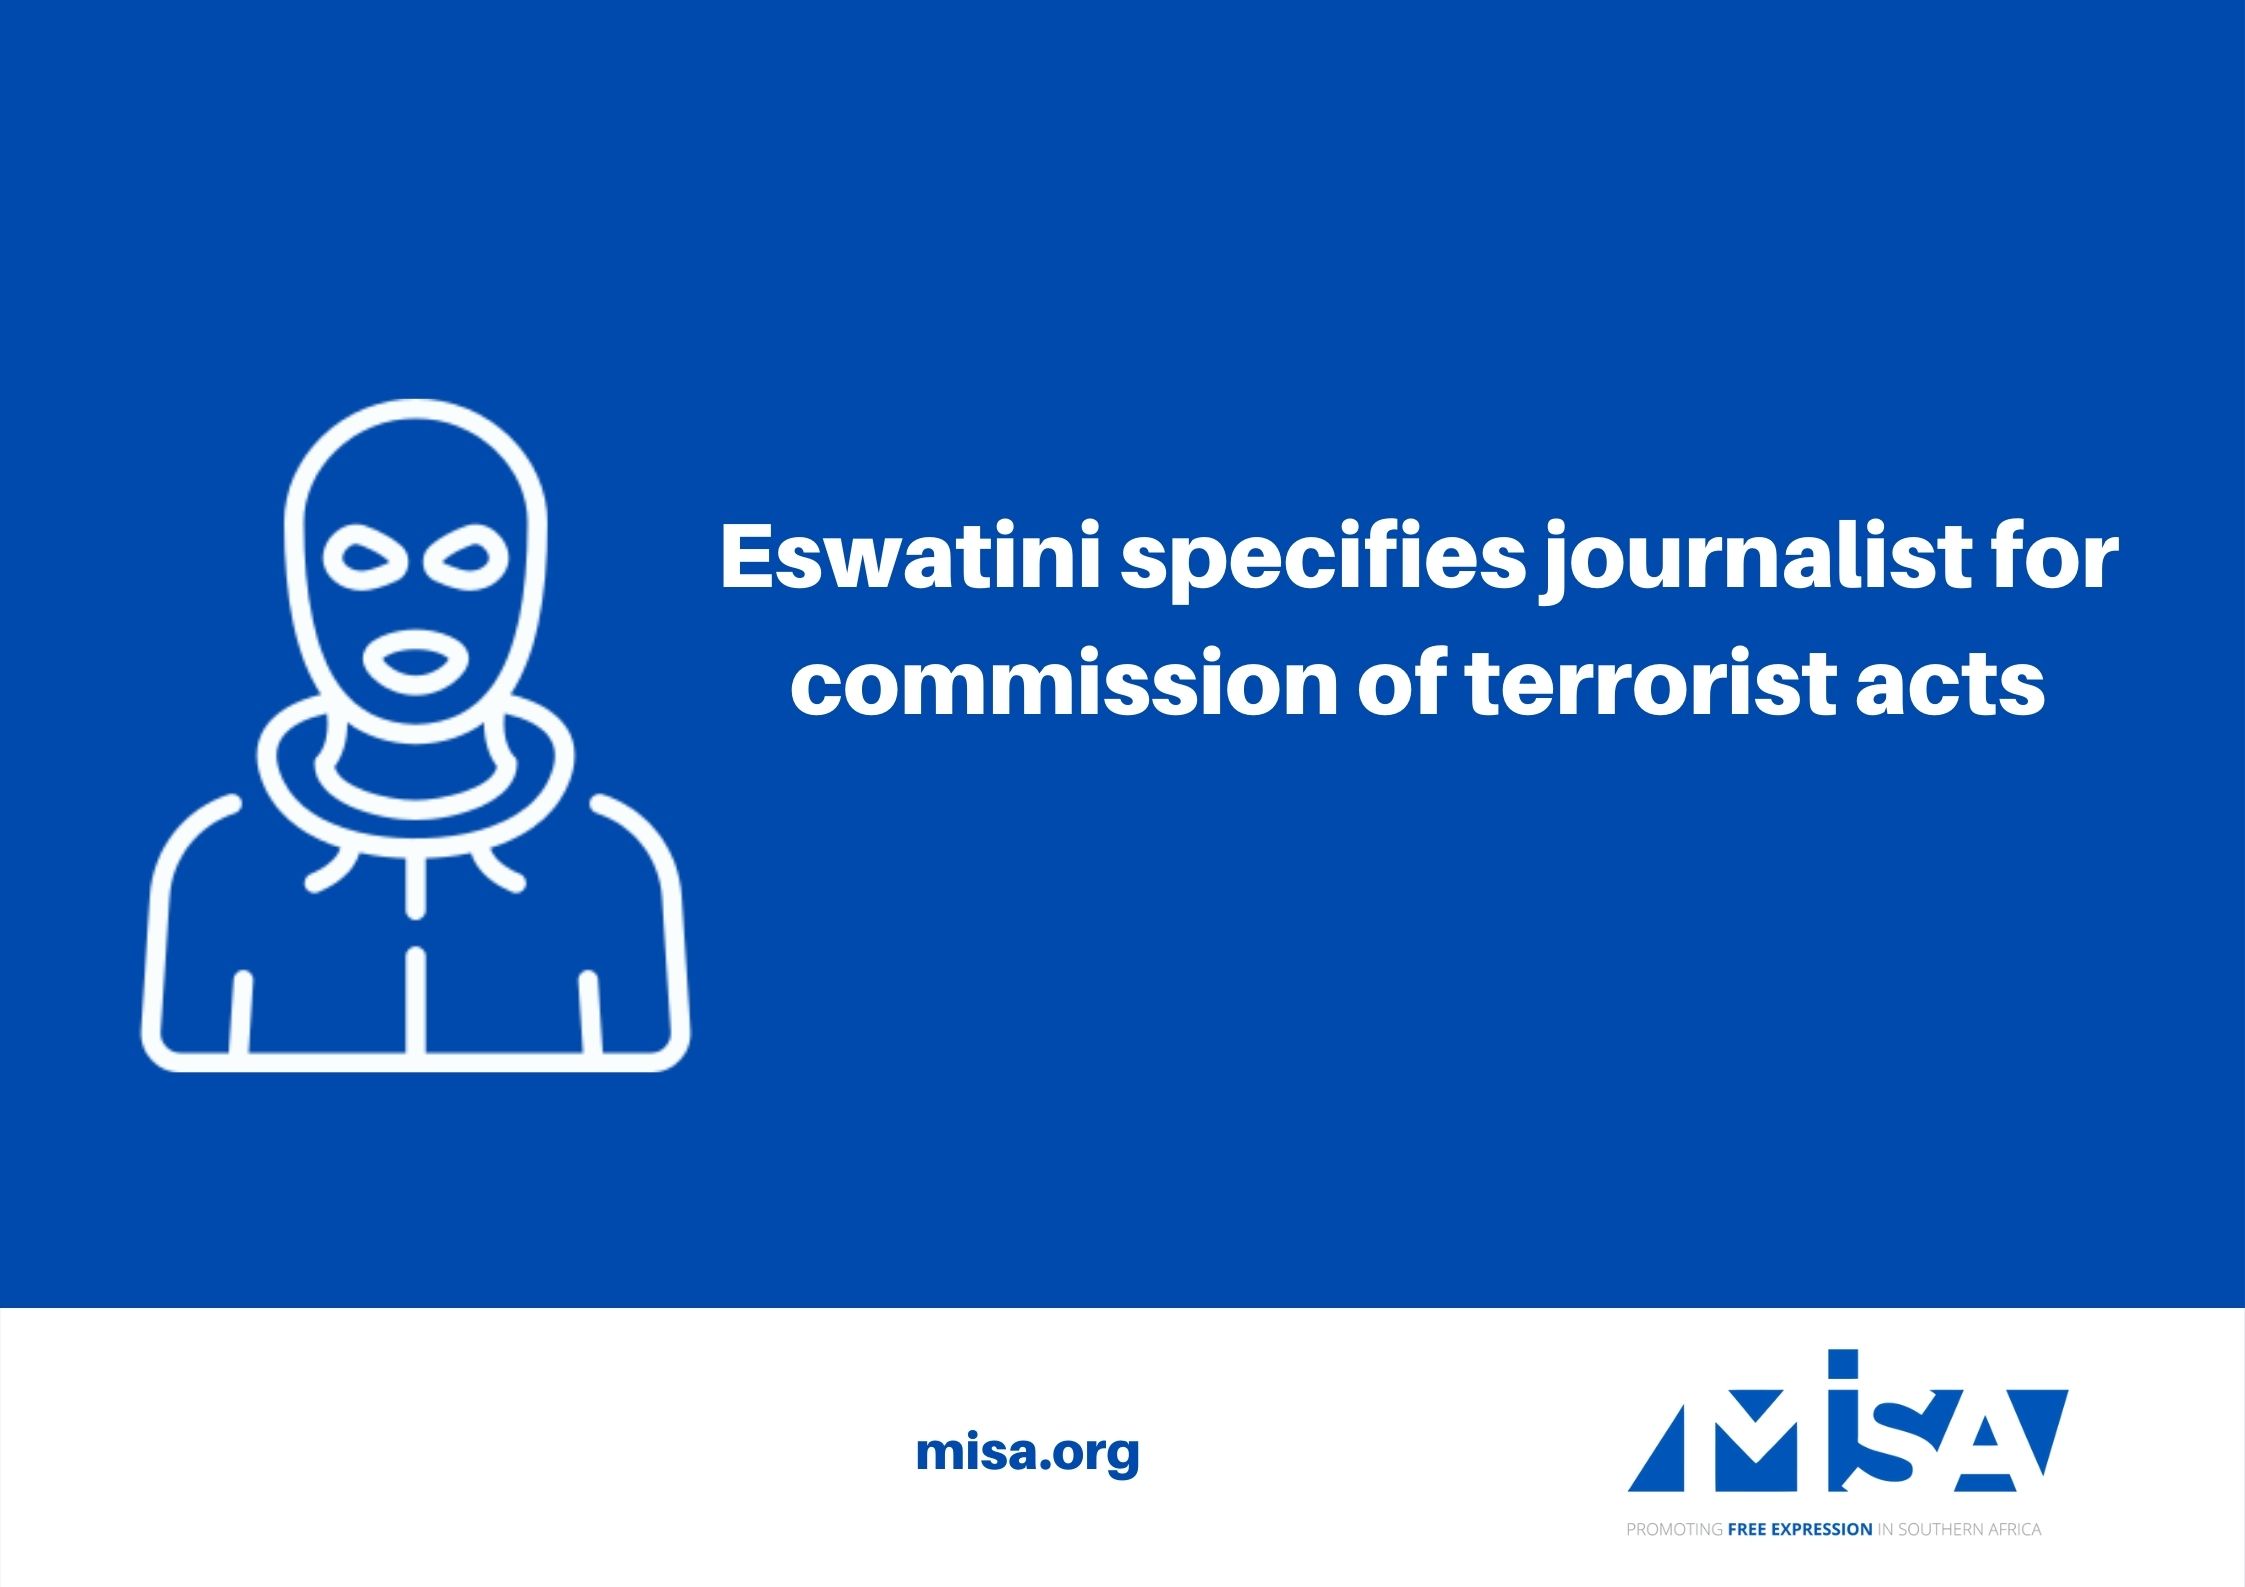 Eswatini specifies journalist for commission of terrorist acts